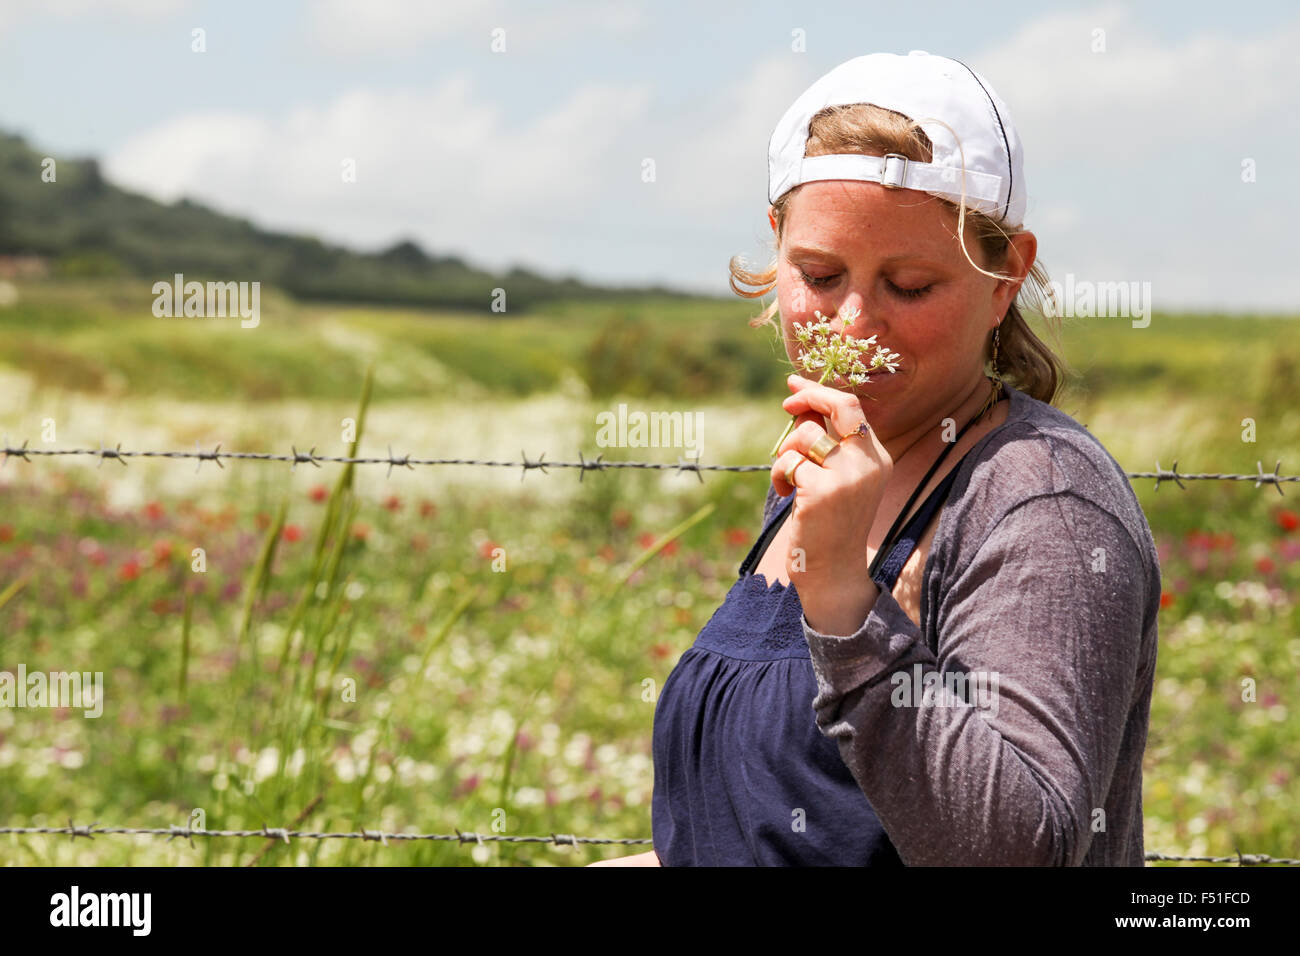 Young blonde female teen smells flows in a field of wildflowers Stock Photo